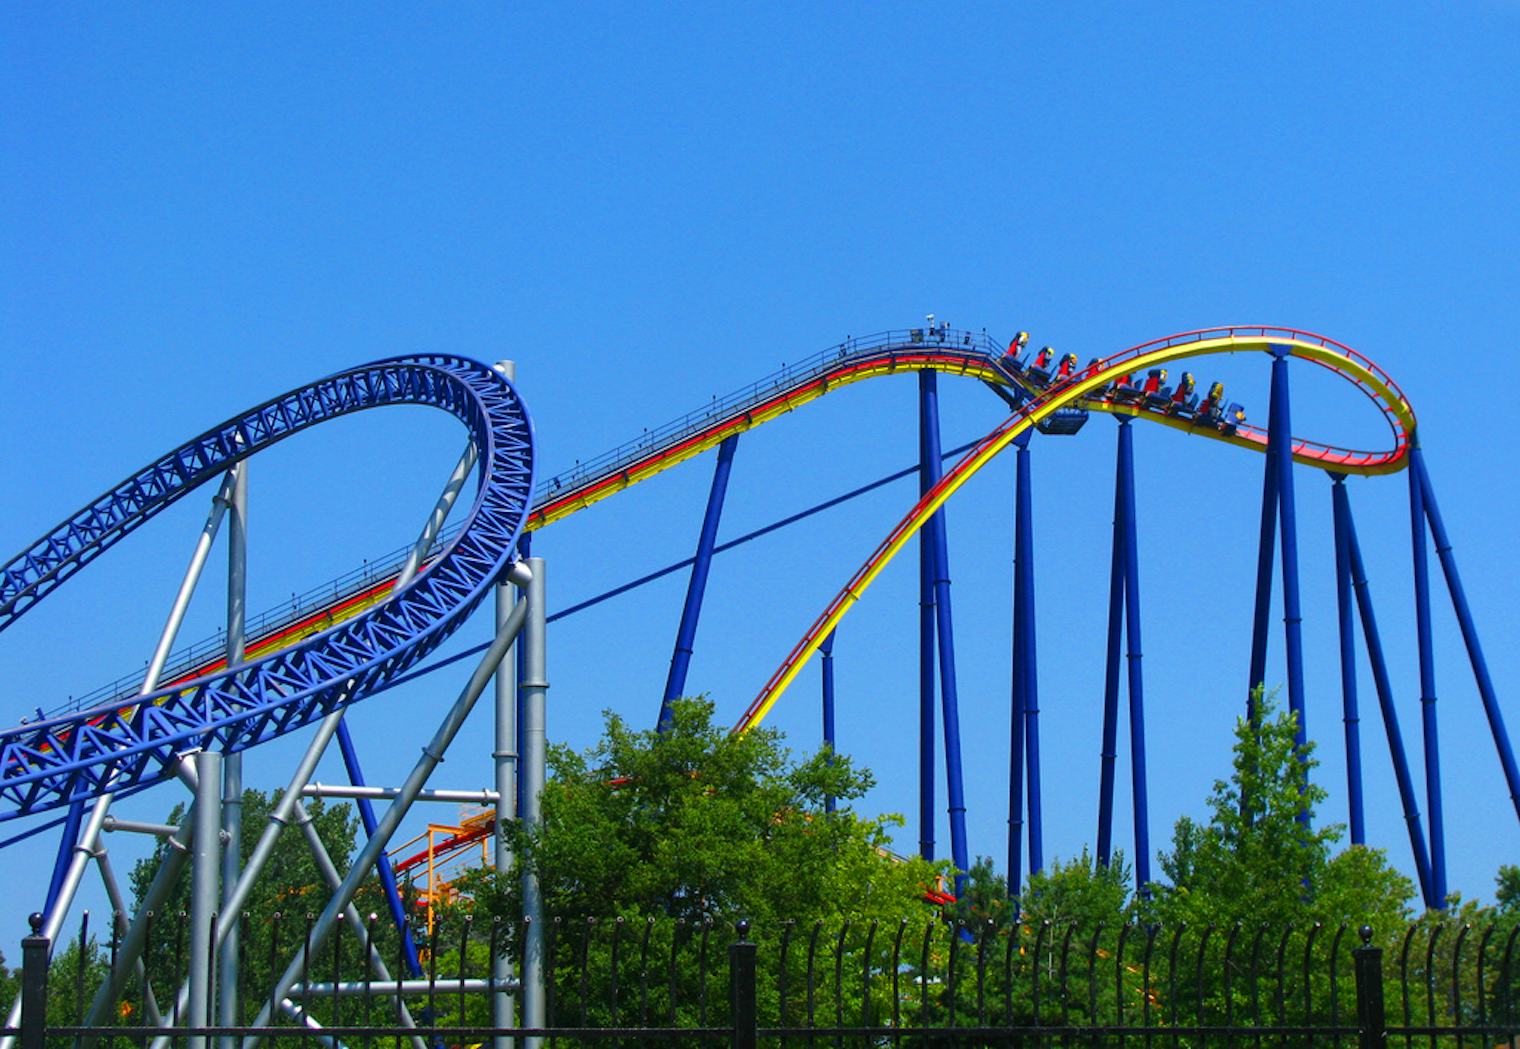 What's The Best Amusement Park in America? The 10 Best Theme Parks To ...